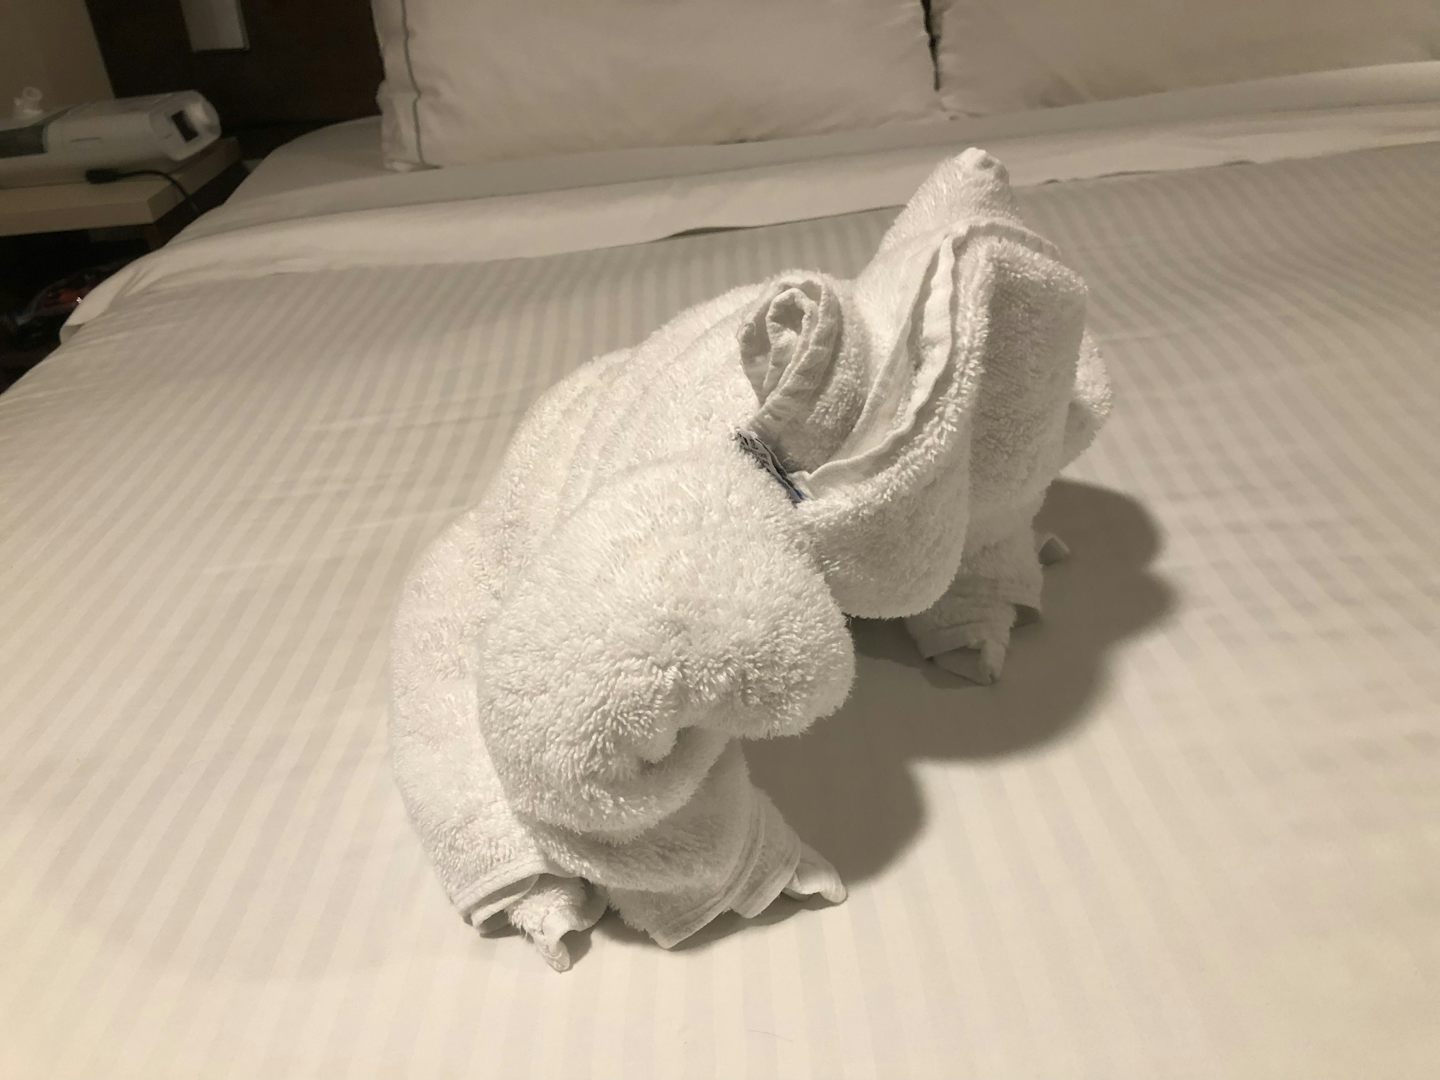 Towel animals and critters each evening upon returning to cabin